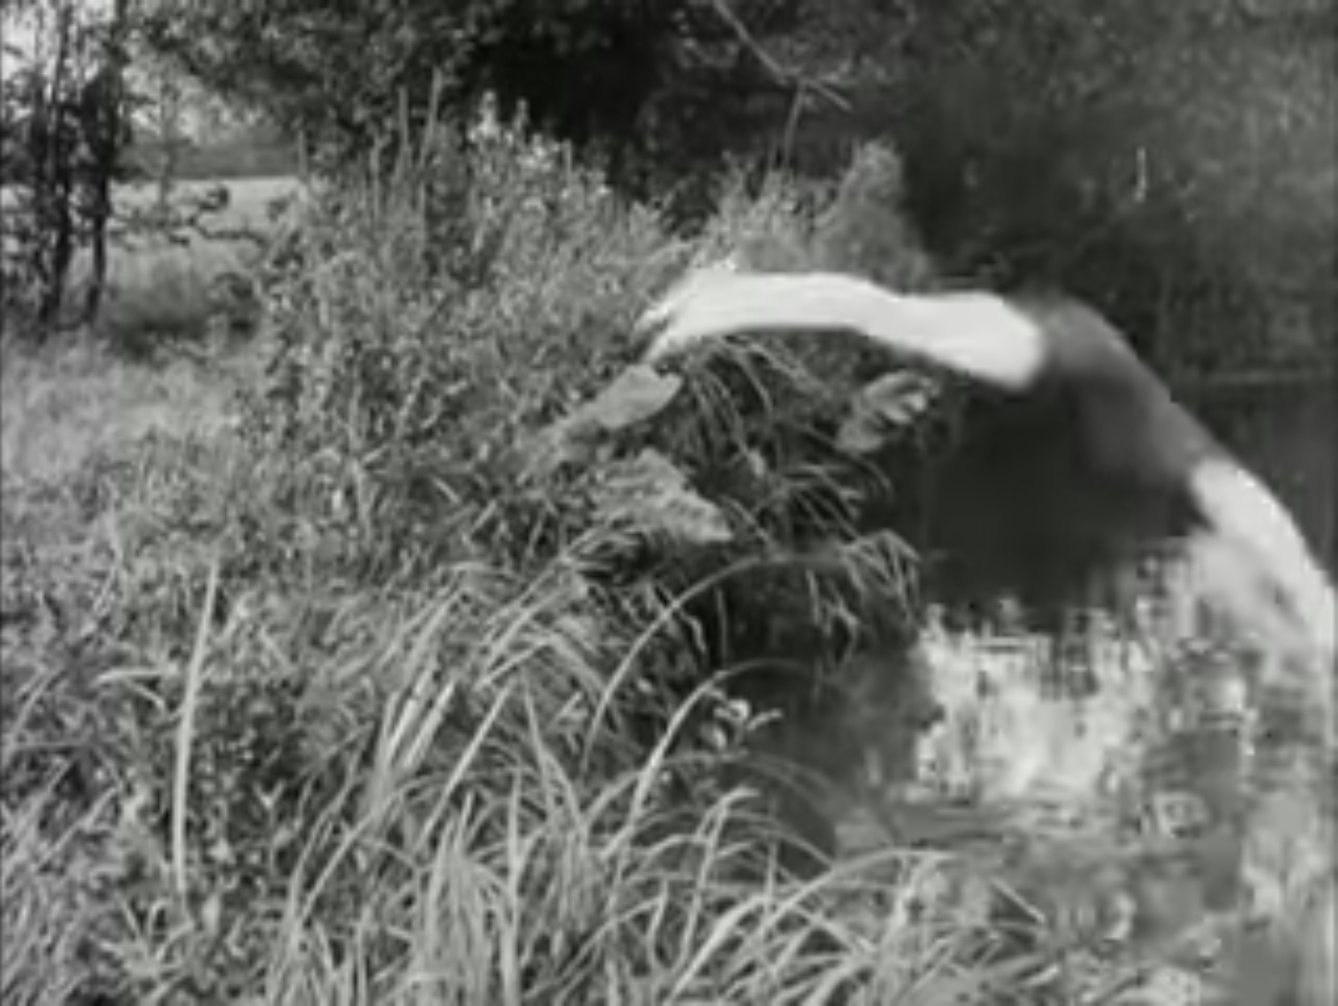 Black and white still from a film showing a man diving from a grassy area into a pond.